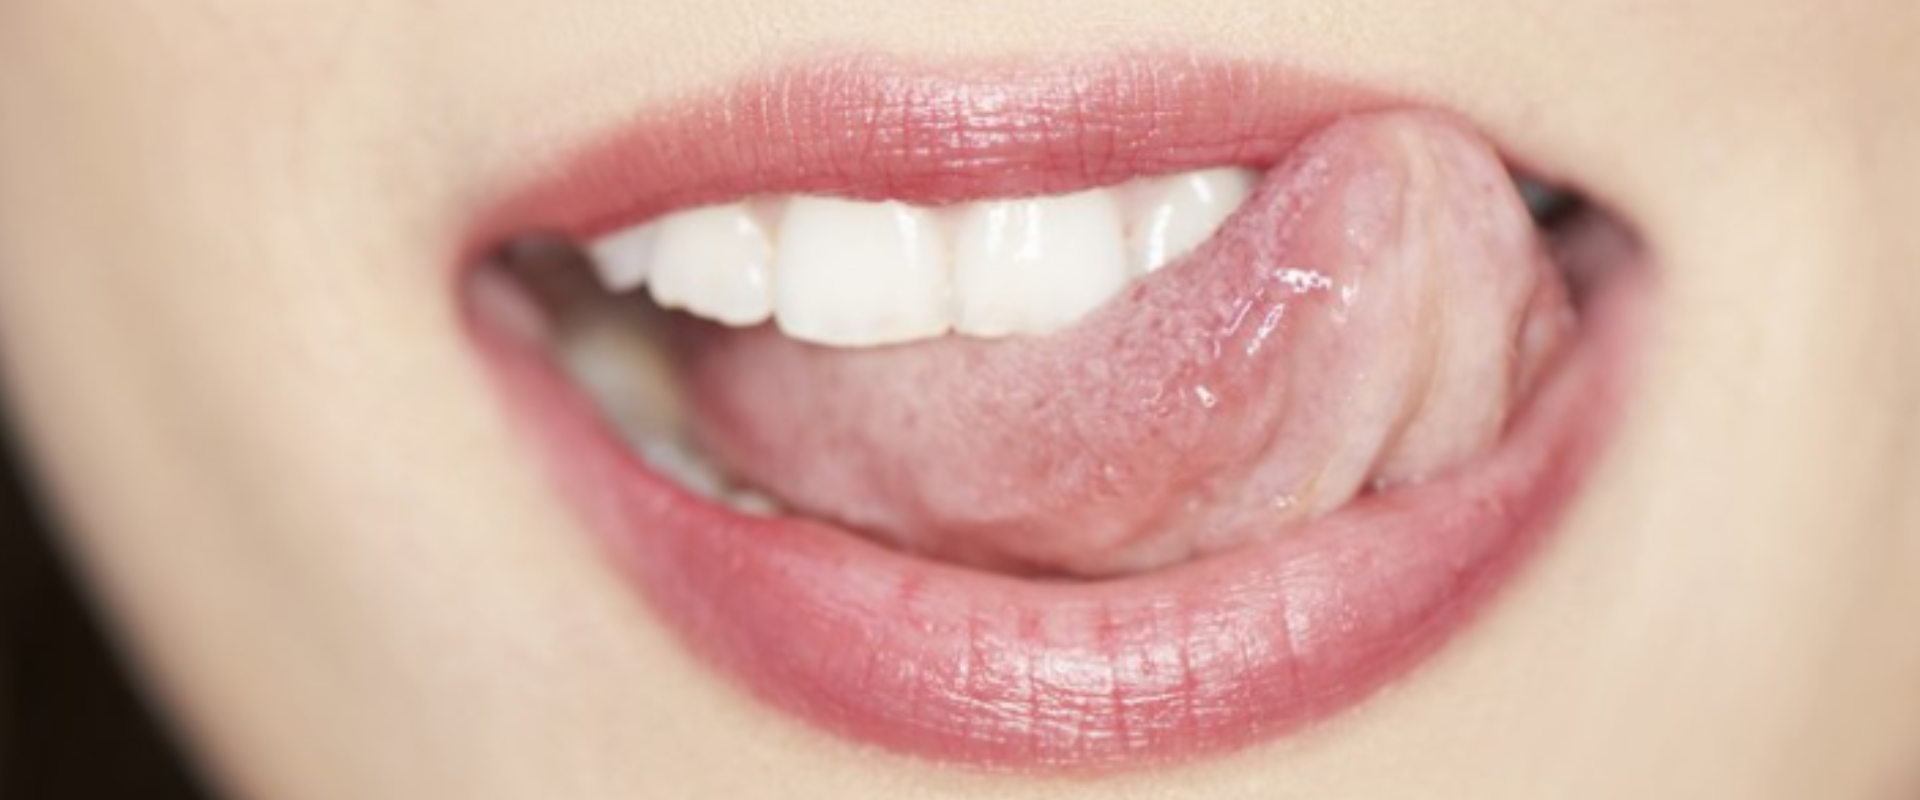 Do you or someone you know have bleeding puffy gums, bad breath, or all three?